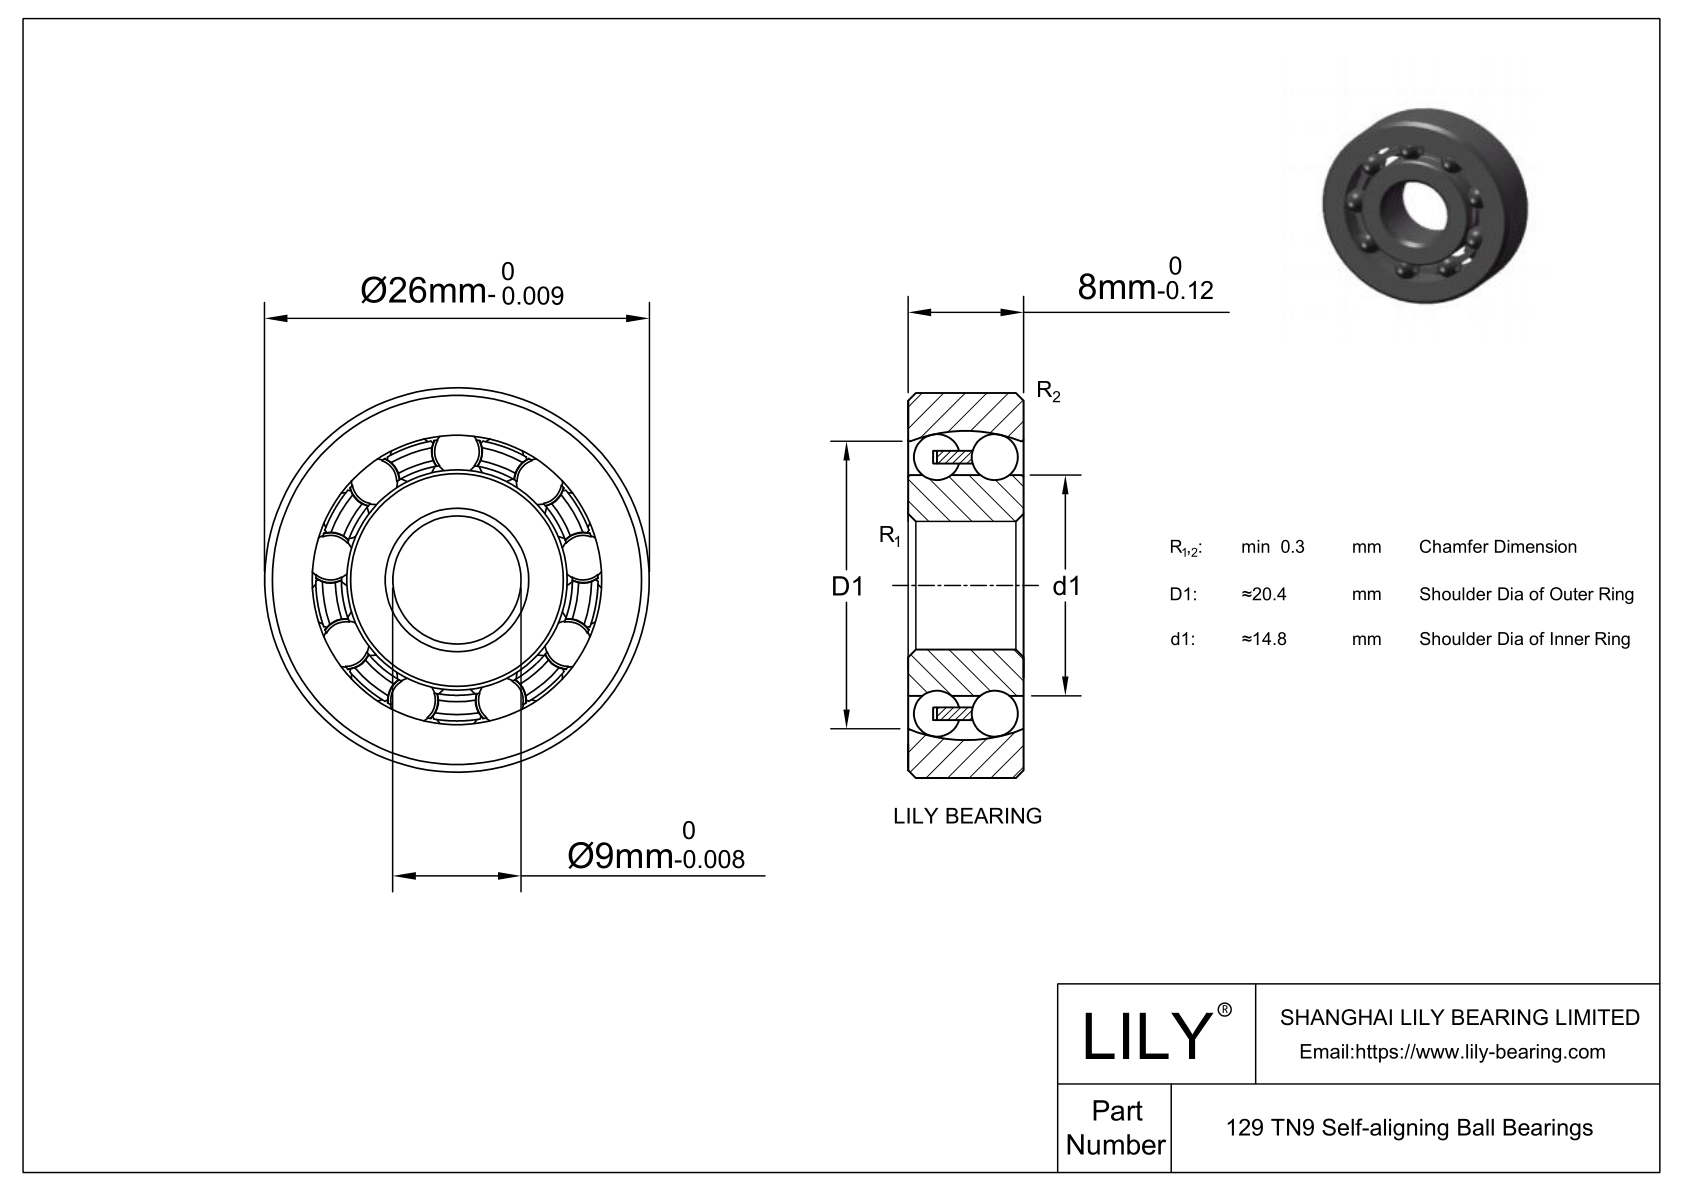 CE129SI Silicon Nitride Self Aligning Ball Bearings cad drawing